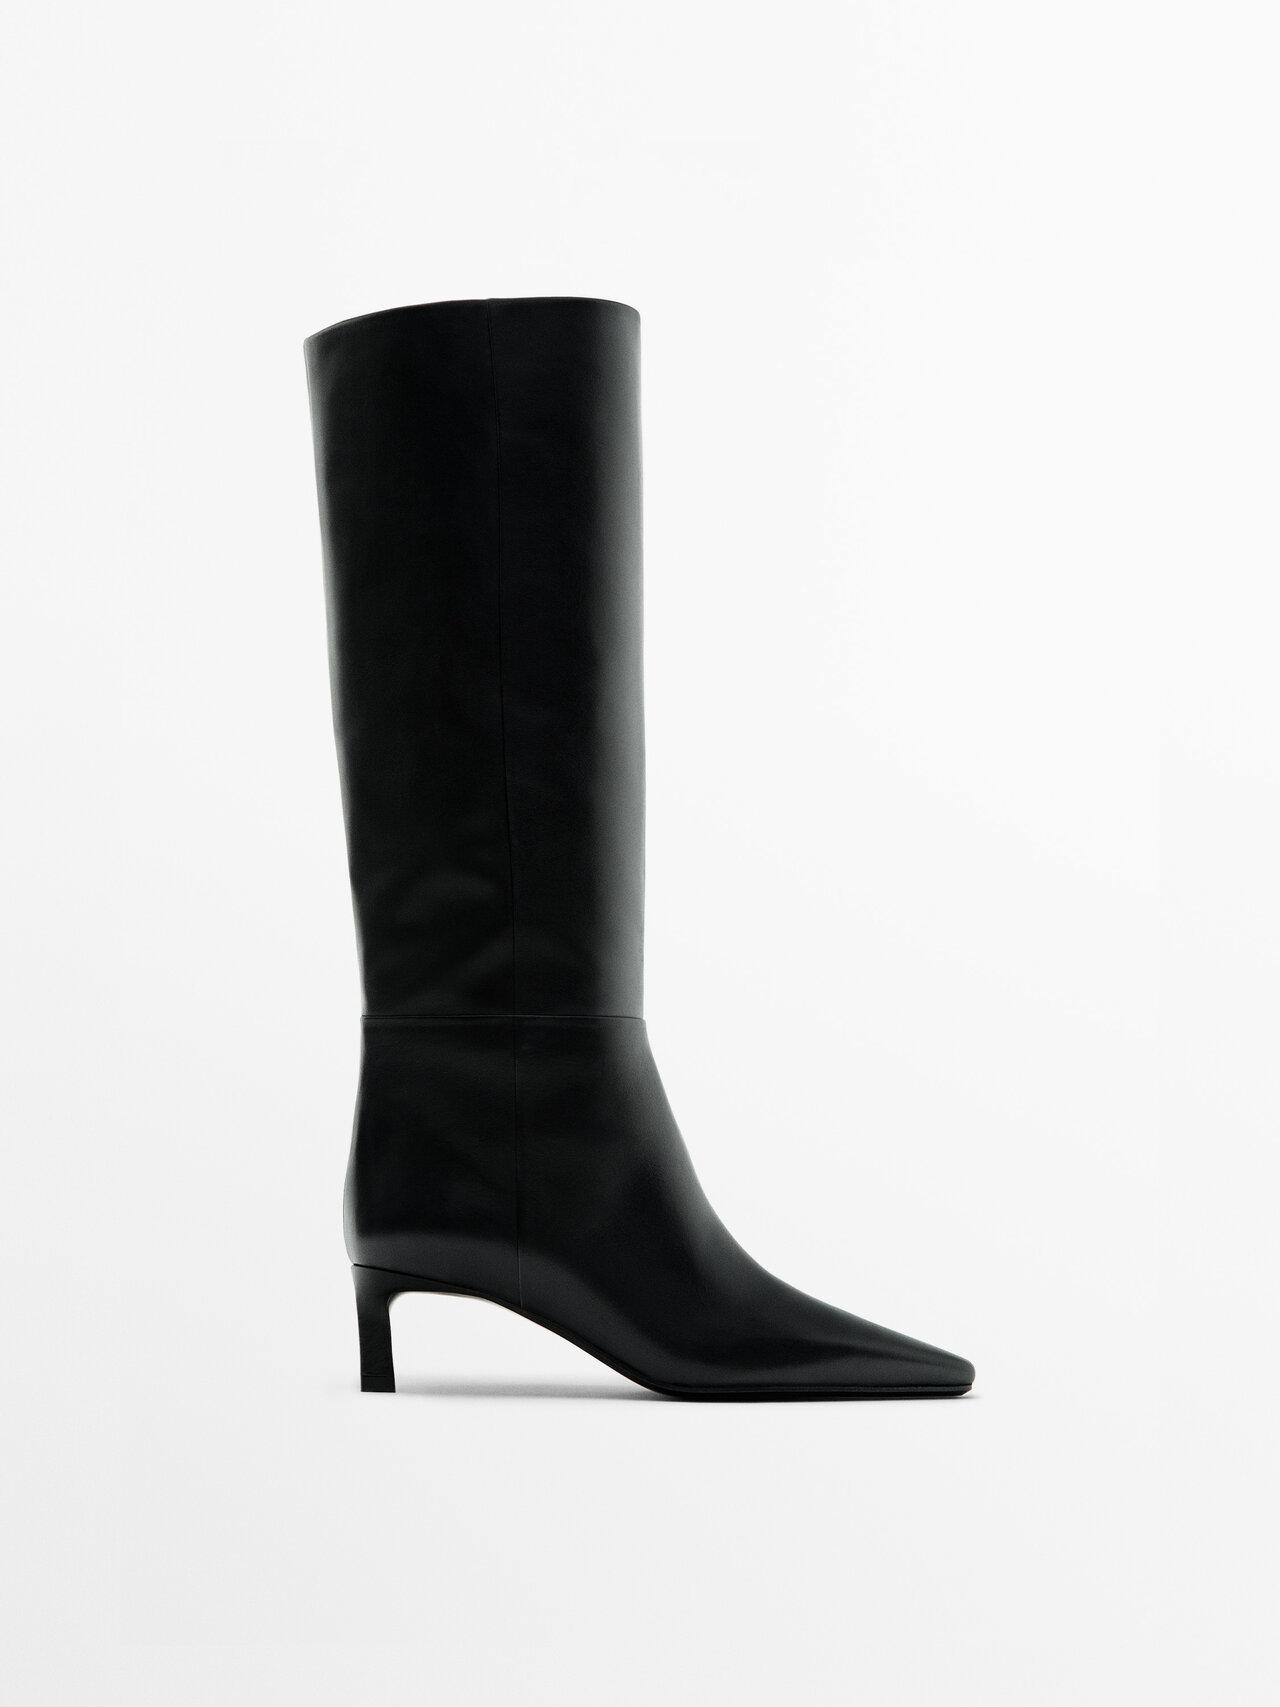 MASSIMO DUTTI Low-heel Boots in Black | Lyst